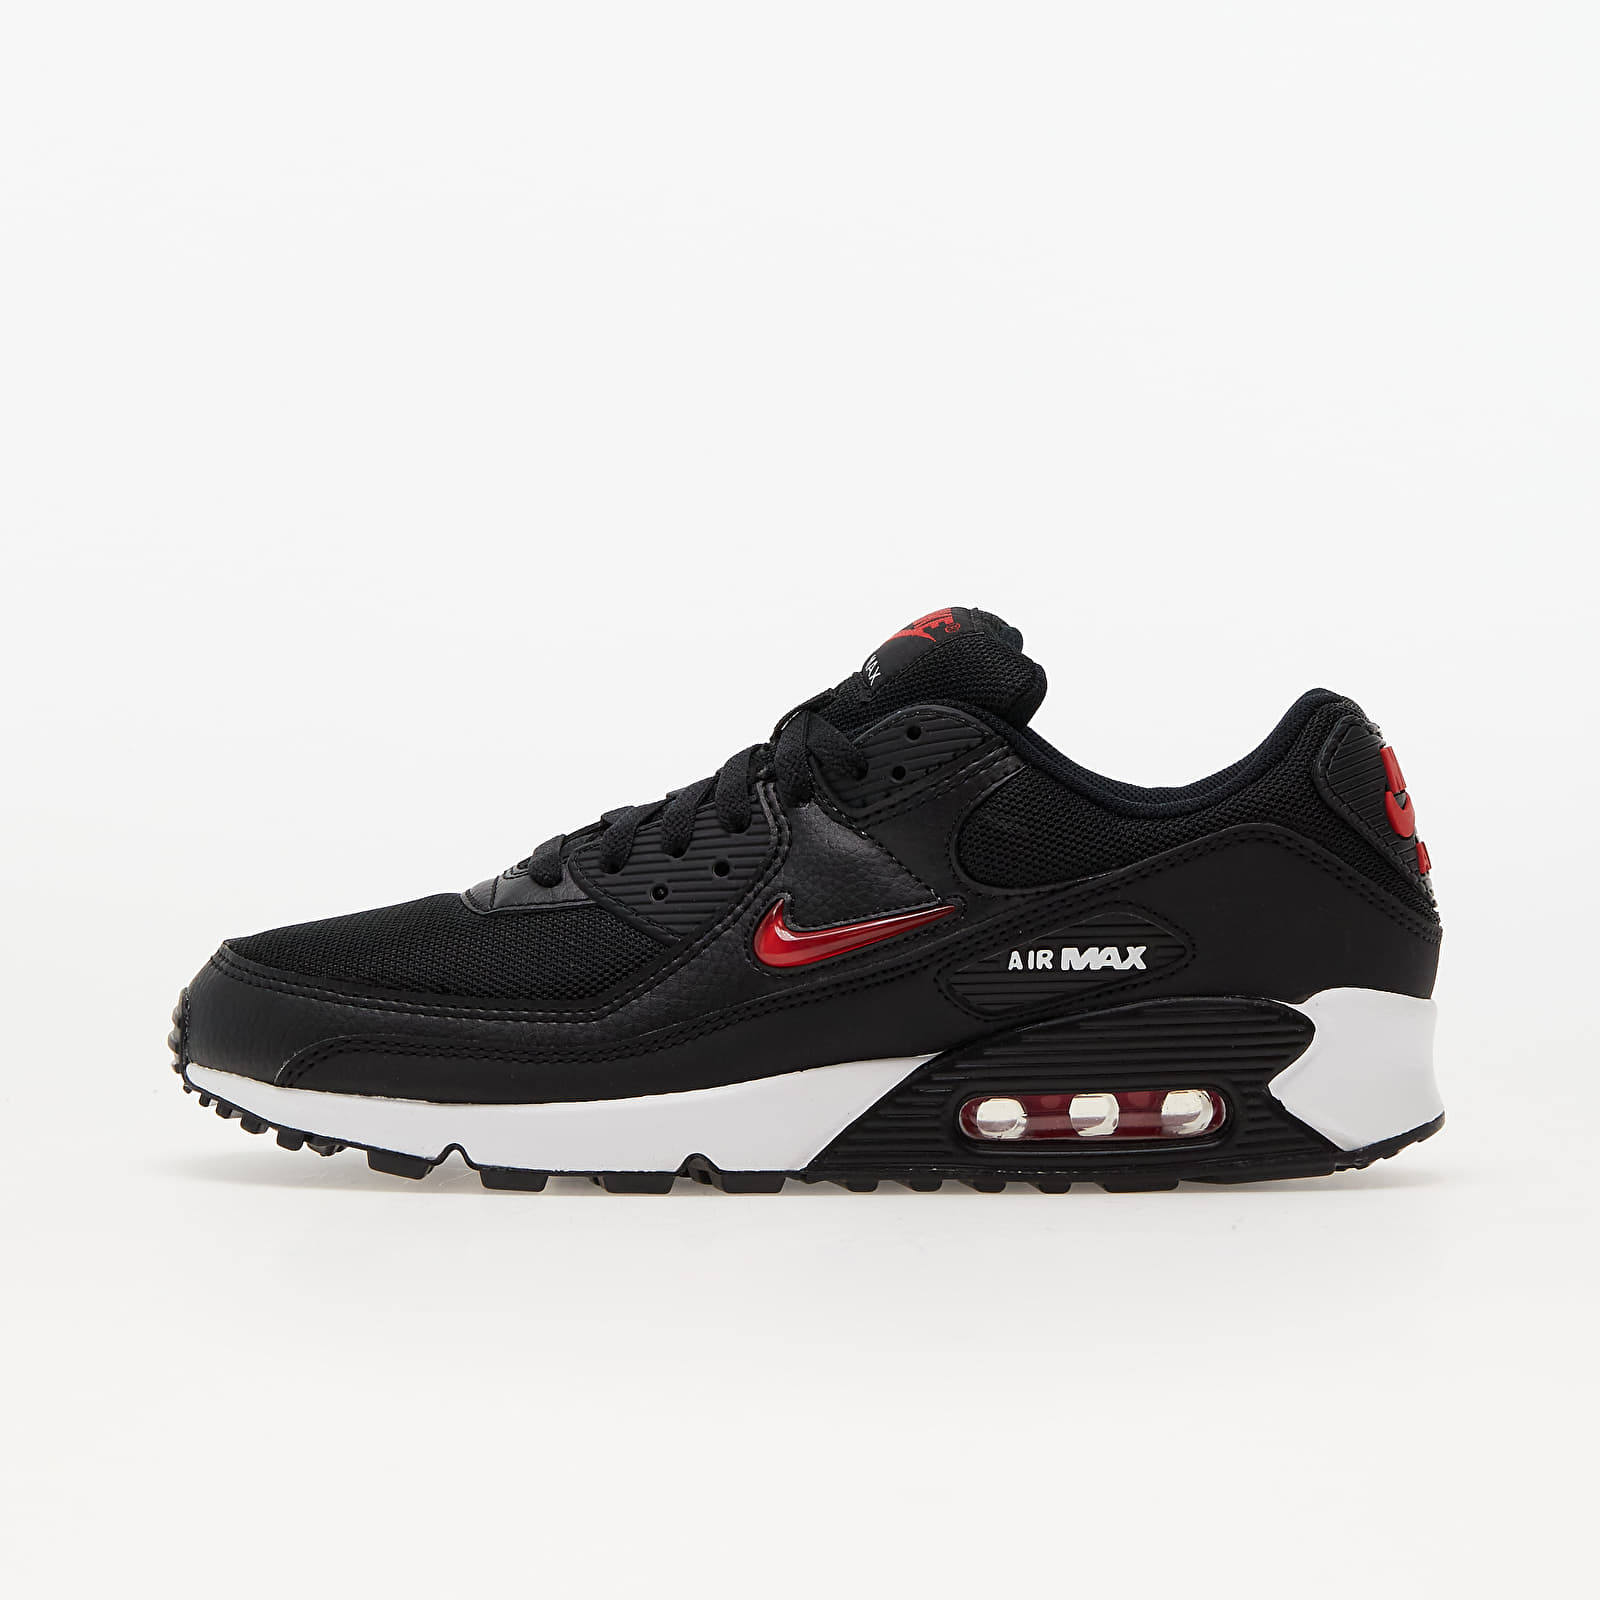 Chaussures et baskets homme Nike Air Max 90 Black/ University Red-White